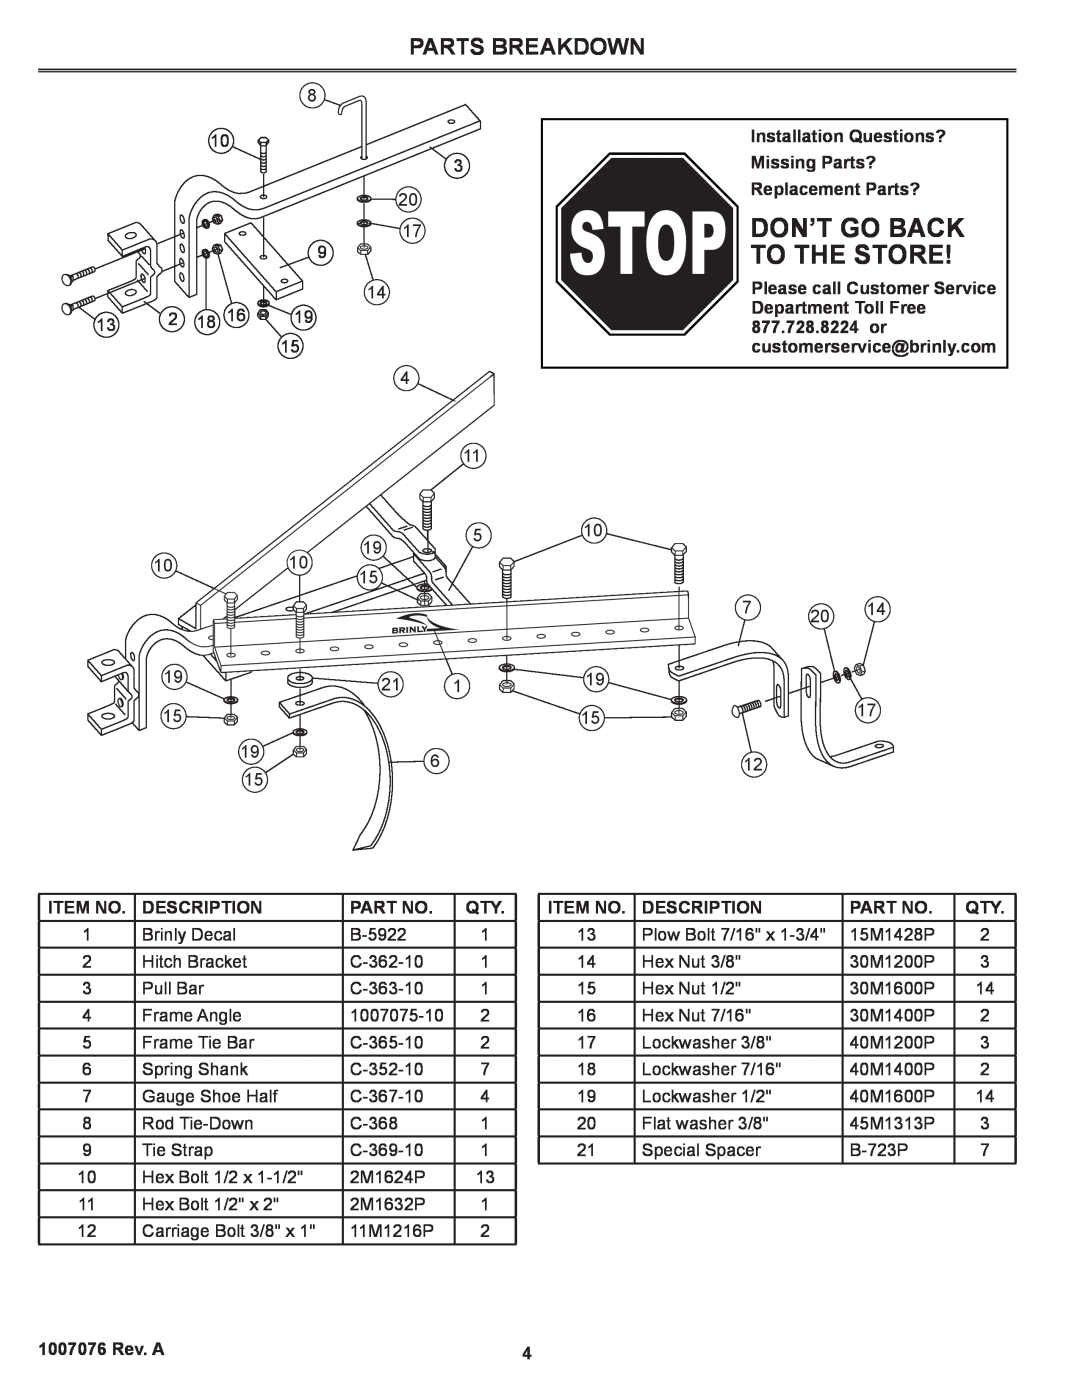 Sears CC-560 Parts Breakdown, Stop Don’T Go Back To The Store, Installation Questions? Missing Parts? Replacement Parts? 